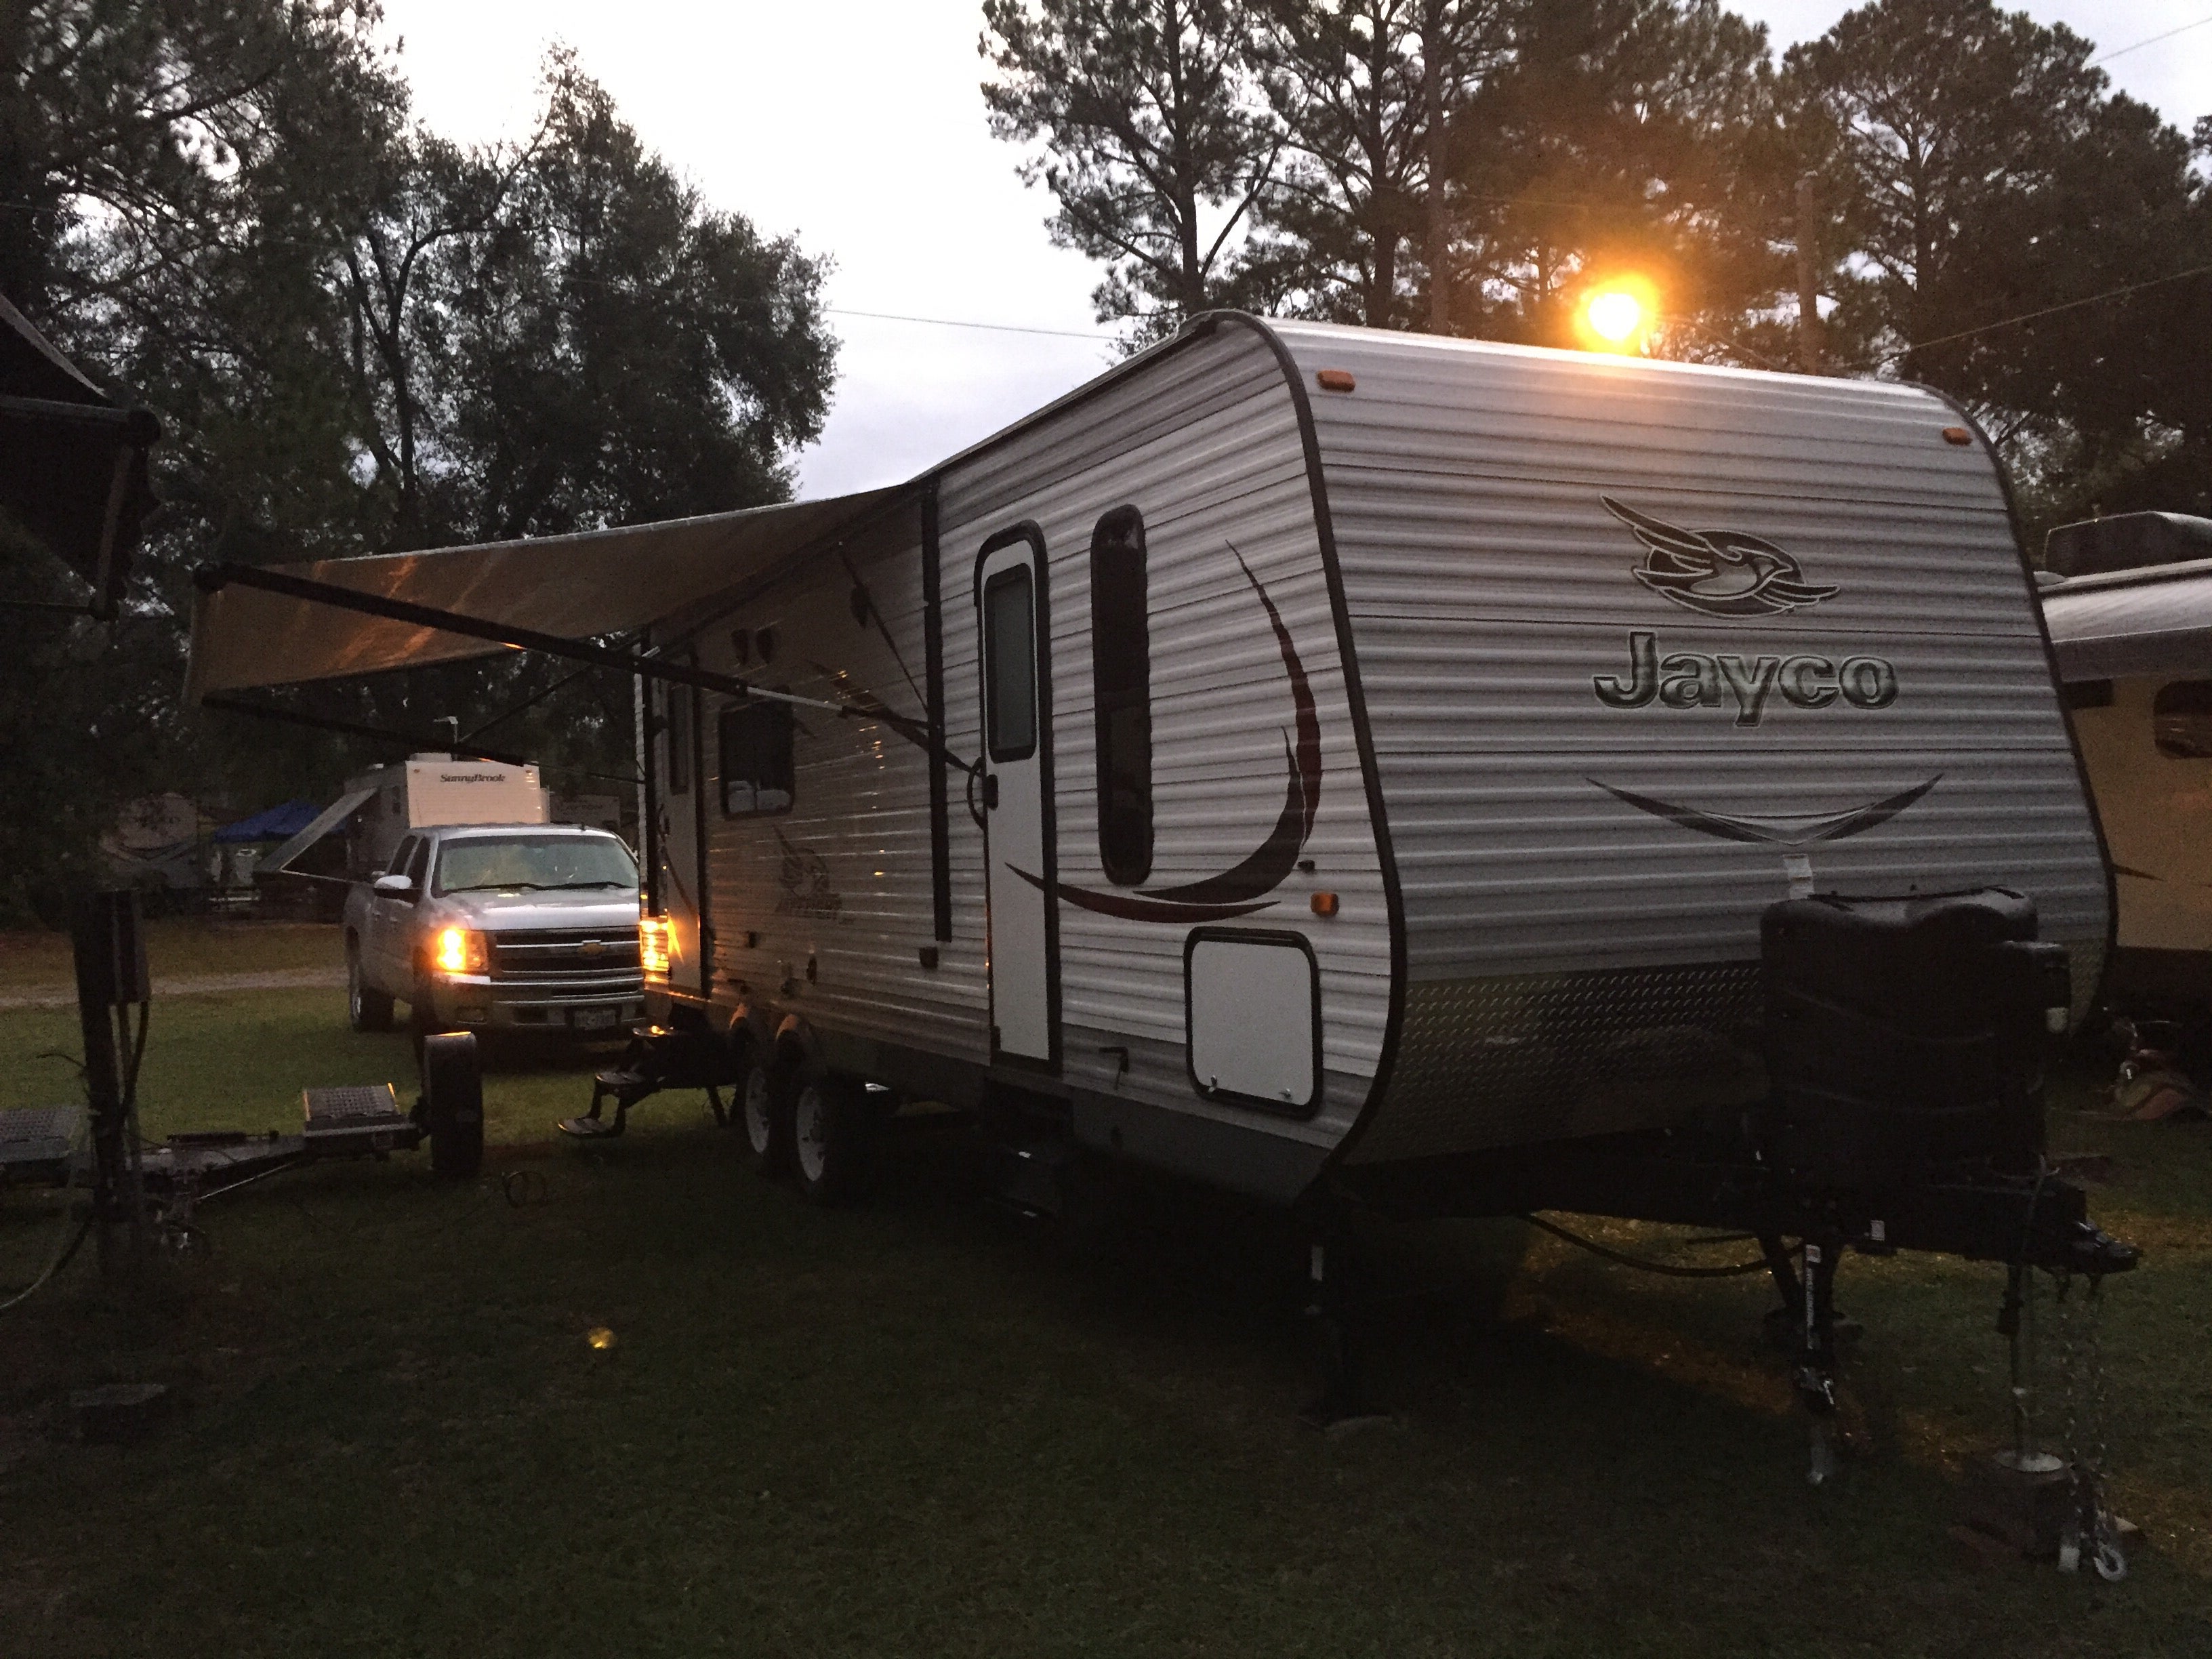 Camper submitted image from Whispering Pines Campground - 5